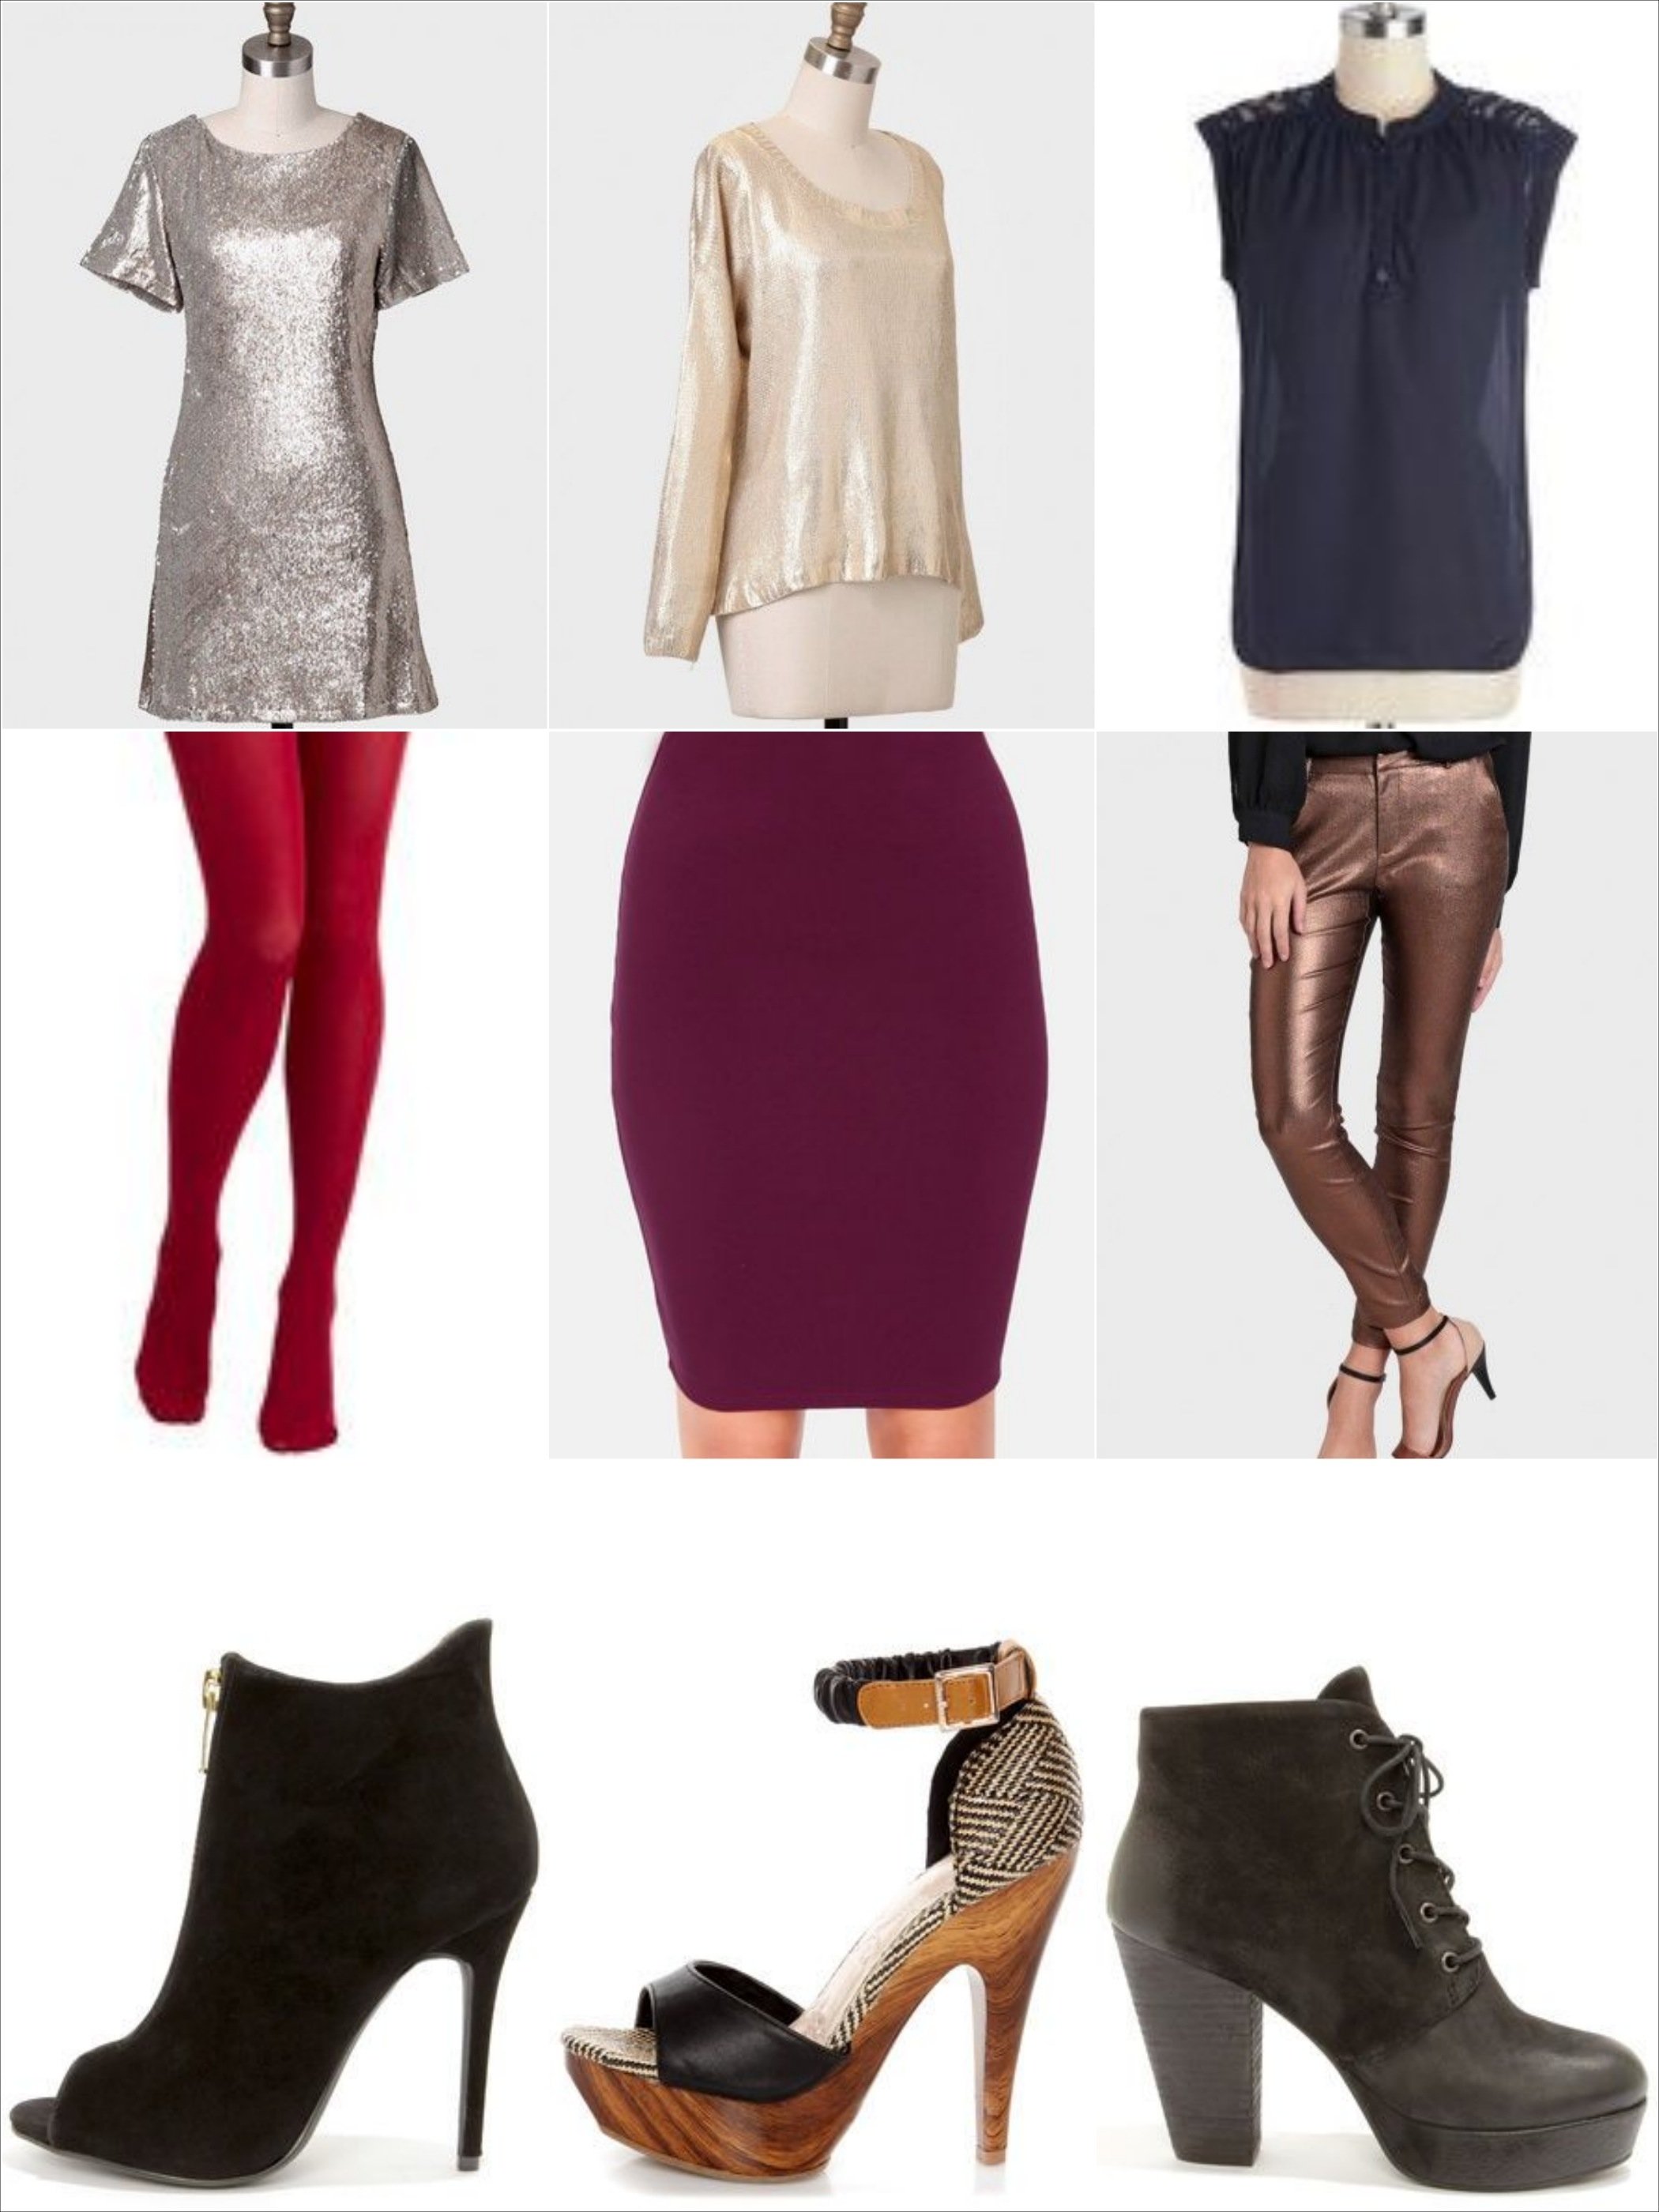 10 Perfect New Years Eve Outfit Ideas 2013 bring in the new year with sparkle bottled creativity 1 2022